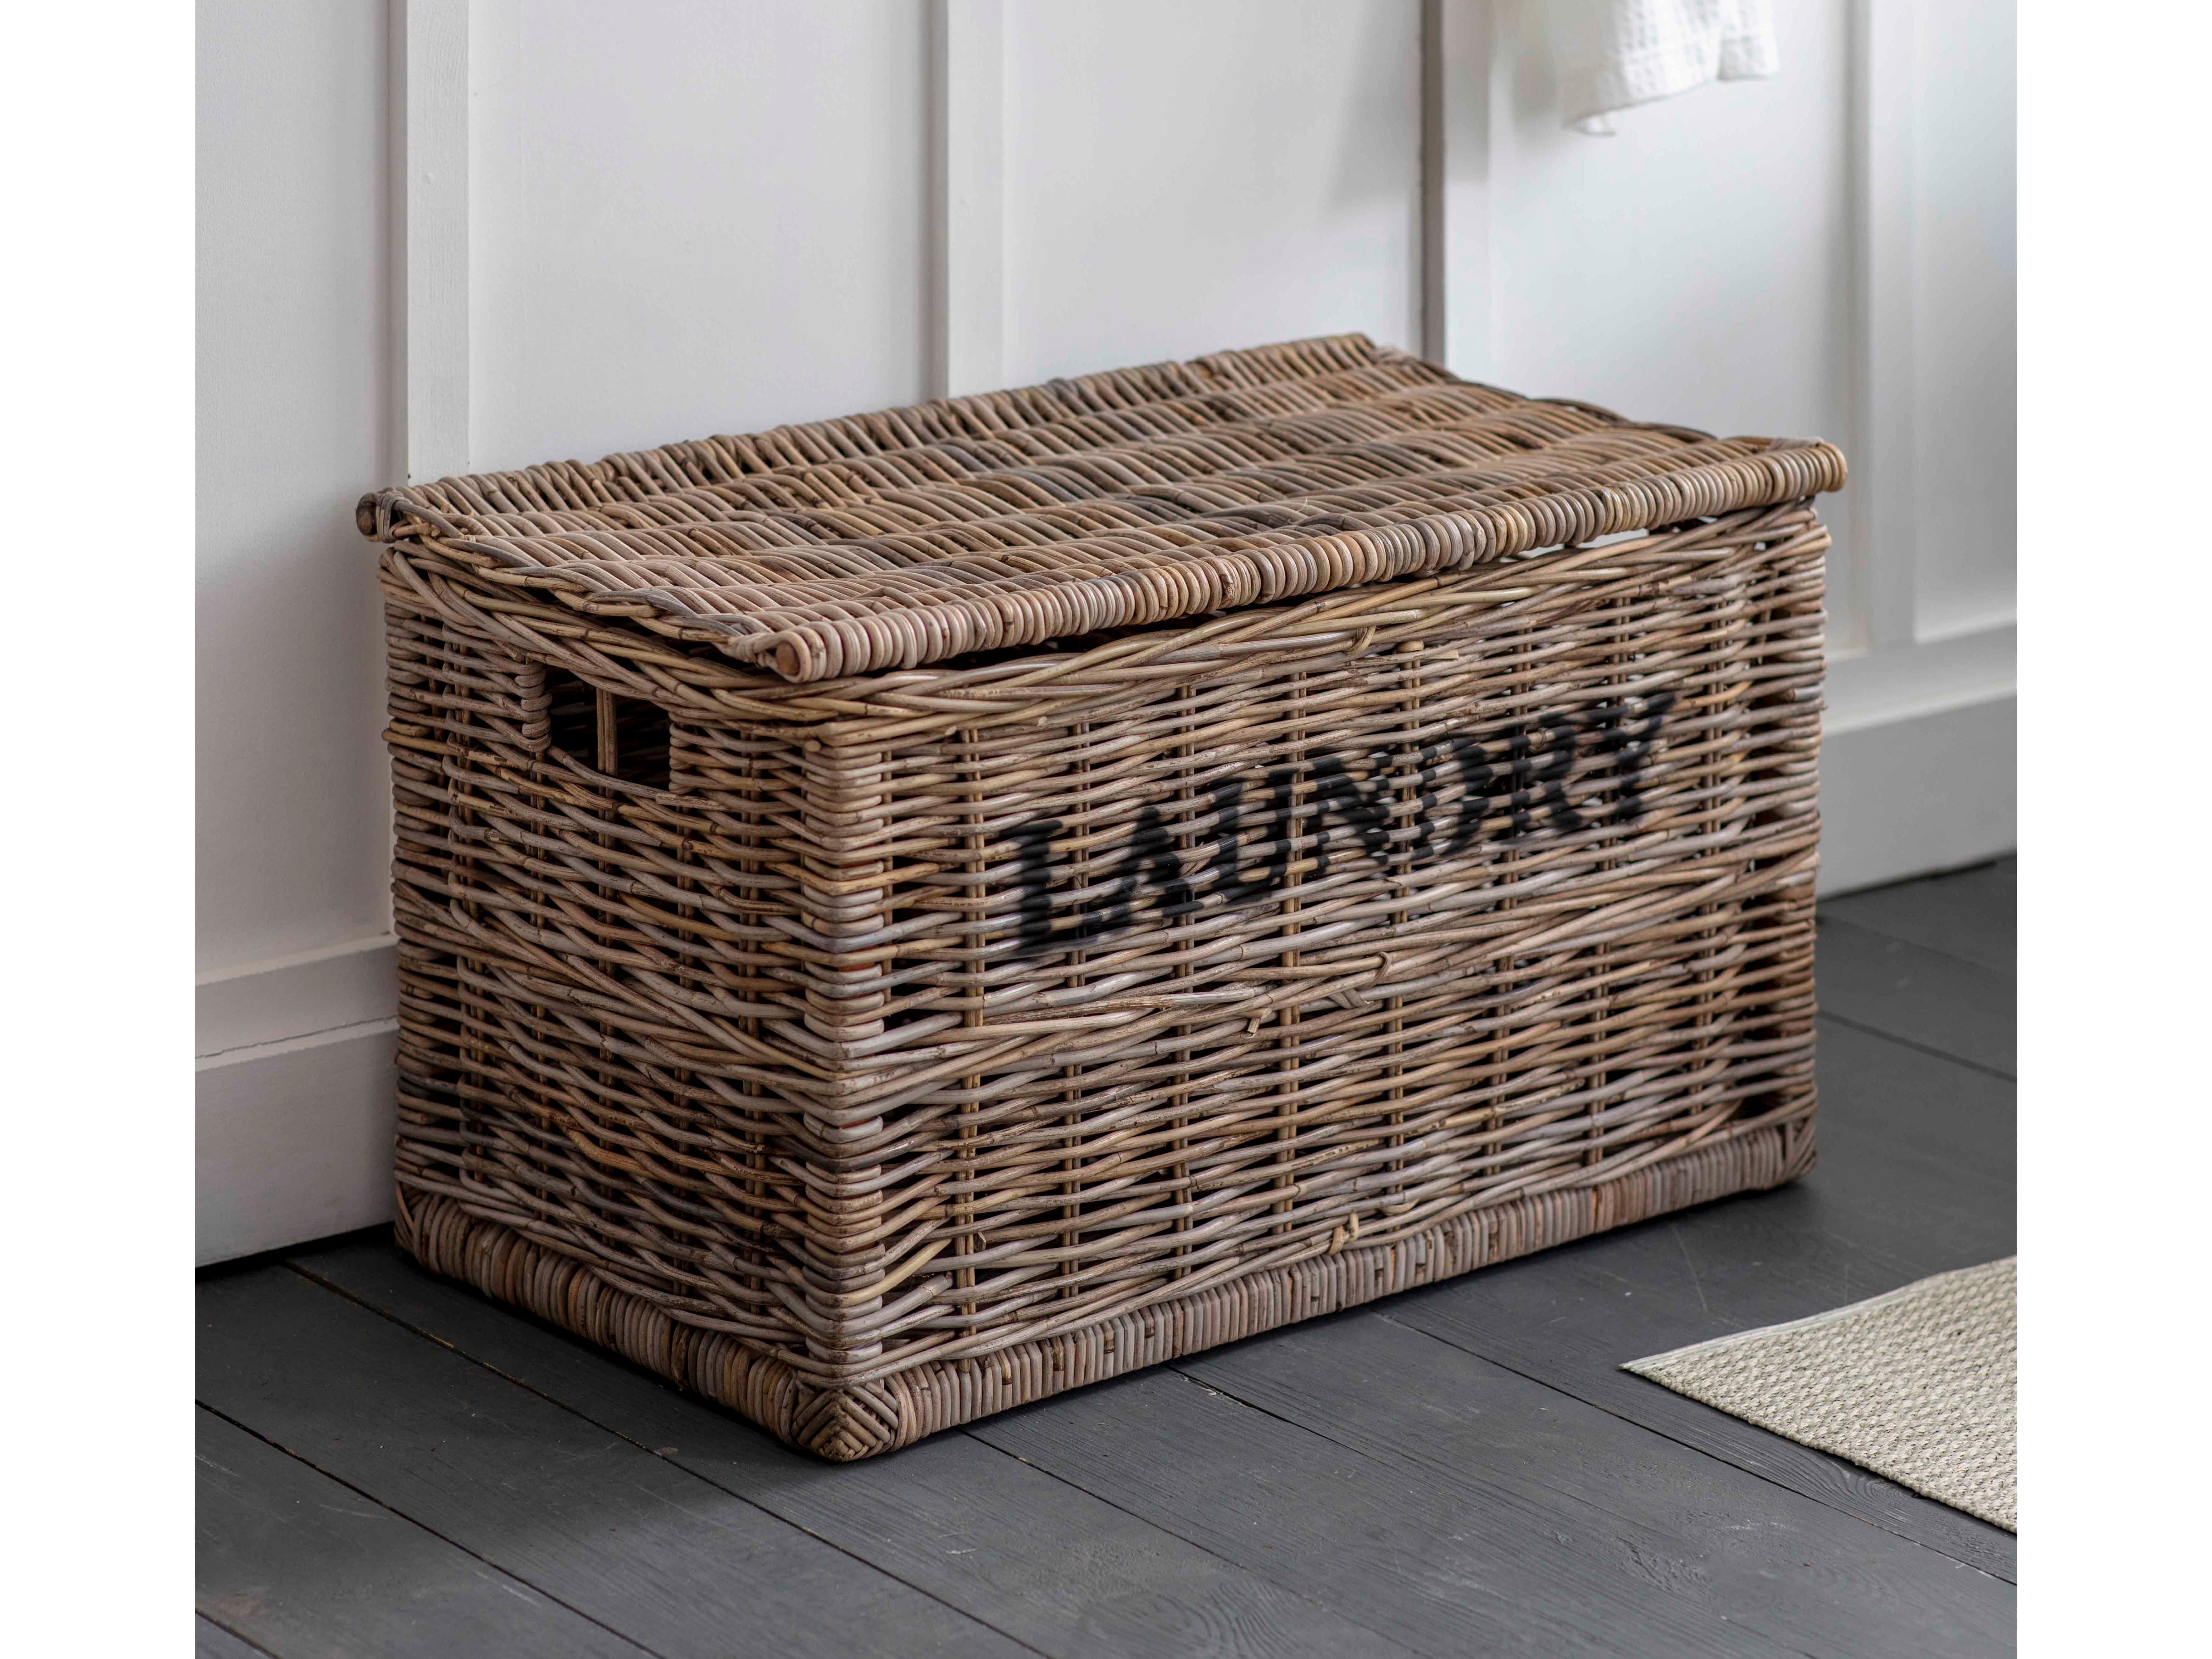 Laundry Baskets Rattan Portable Bedroom with Lid Cotton Burlap Lining Dirty Hamper Clothes Sundries Storage Basket Color : Brown, Size : 35 * 25 * 38cm